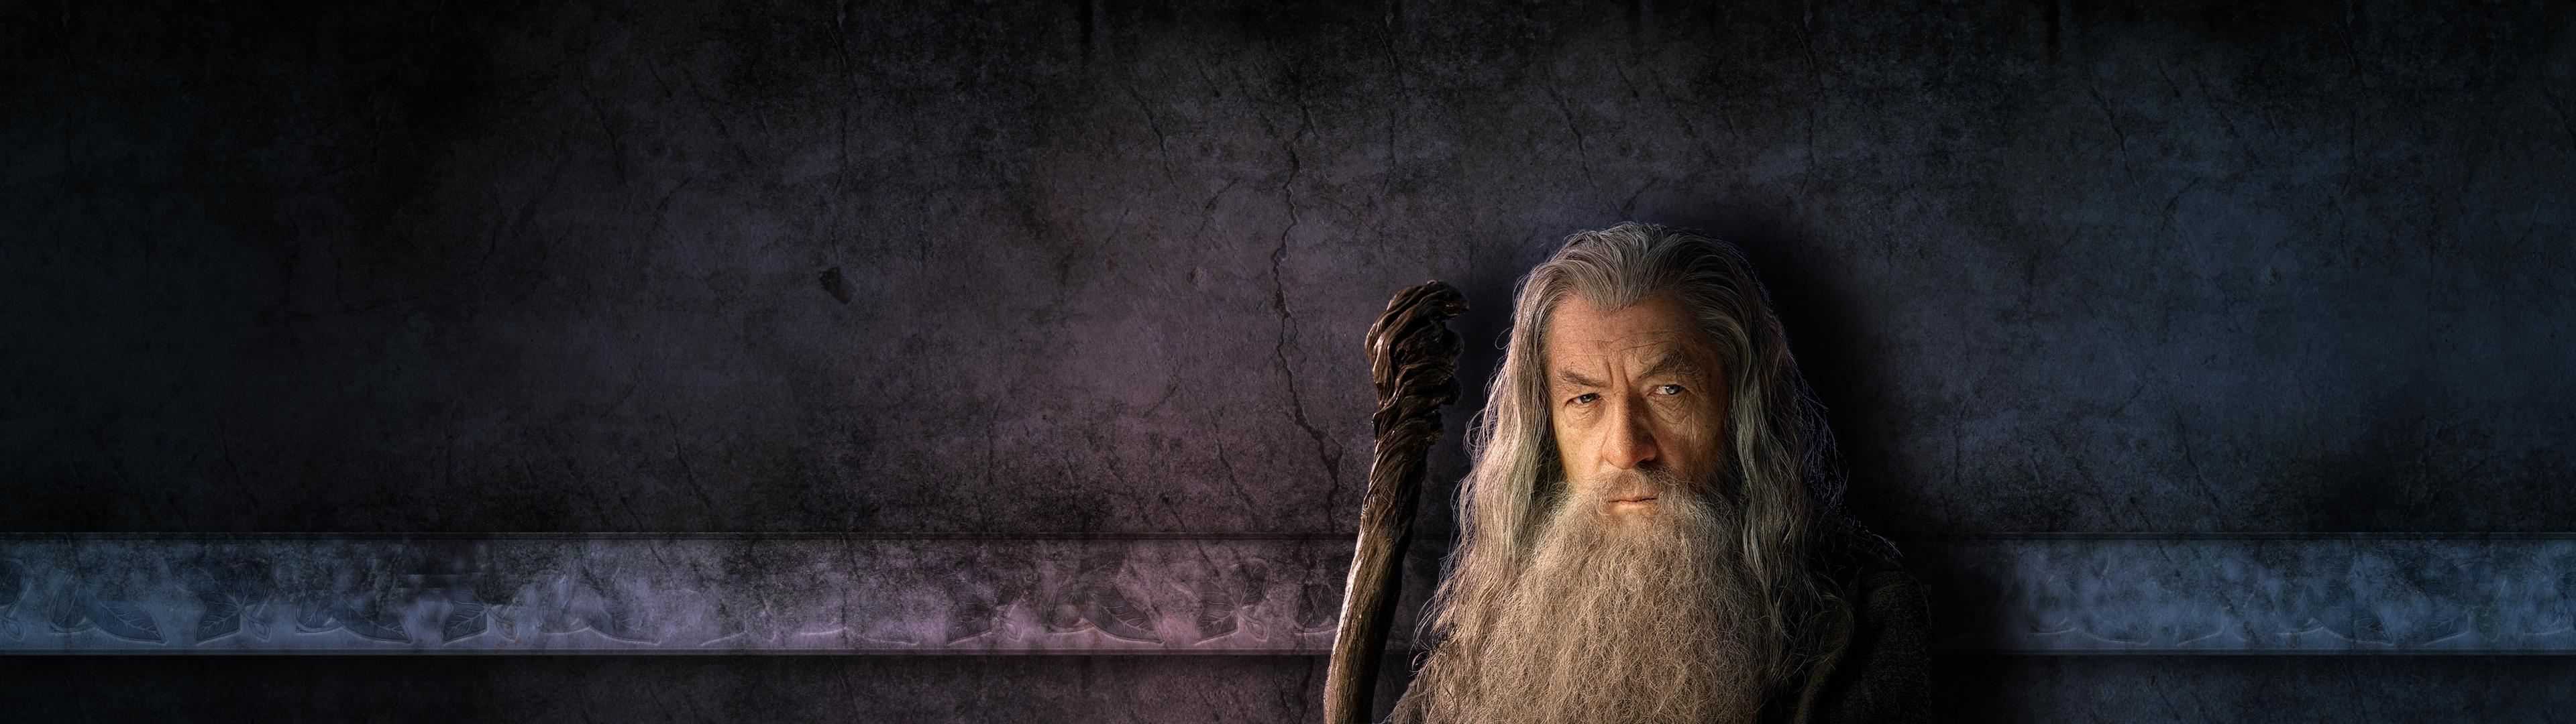 Lord Of The Rings Gandalf Wallpaper